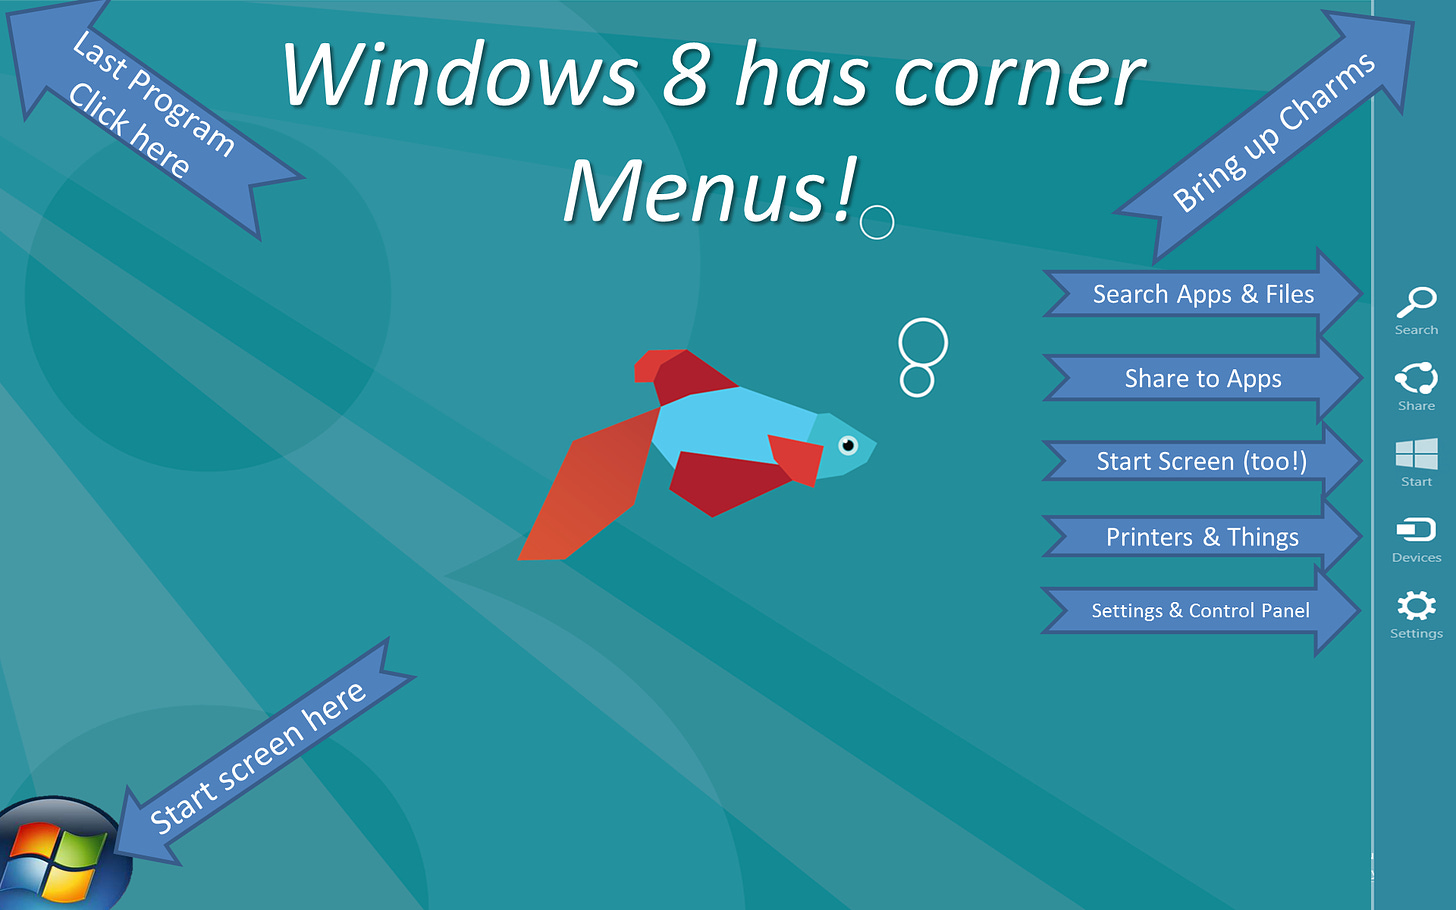 A screen image used as a desktop background humorously. It shows arrows pointing to the corners indicating the functionality as described in the text. There are also images of the charms. The title is "Windows 8 has corner menus"